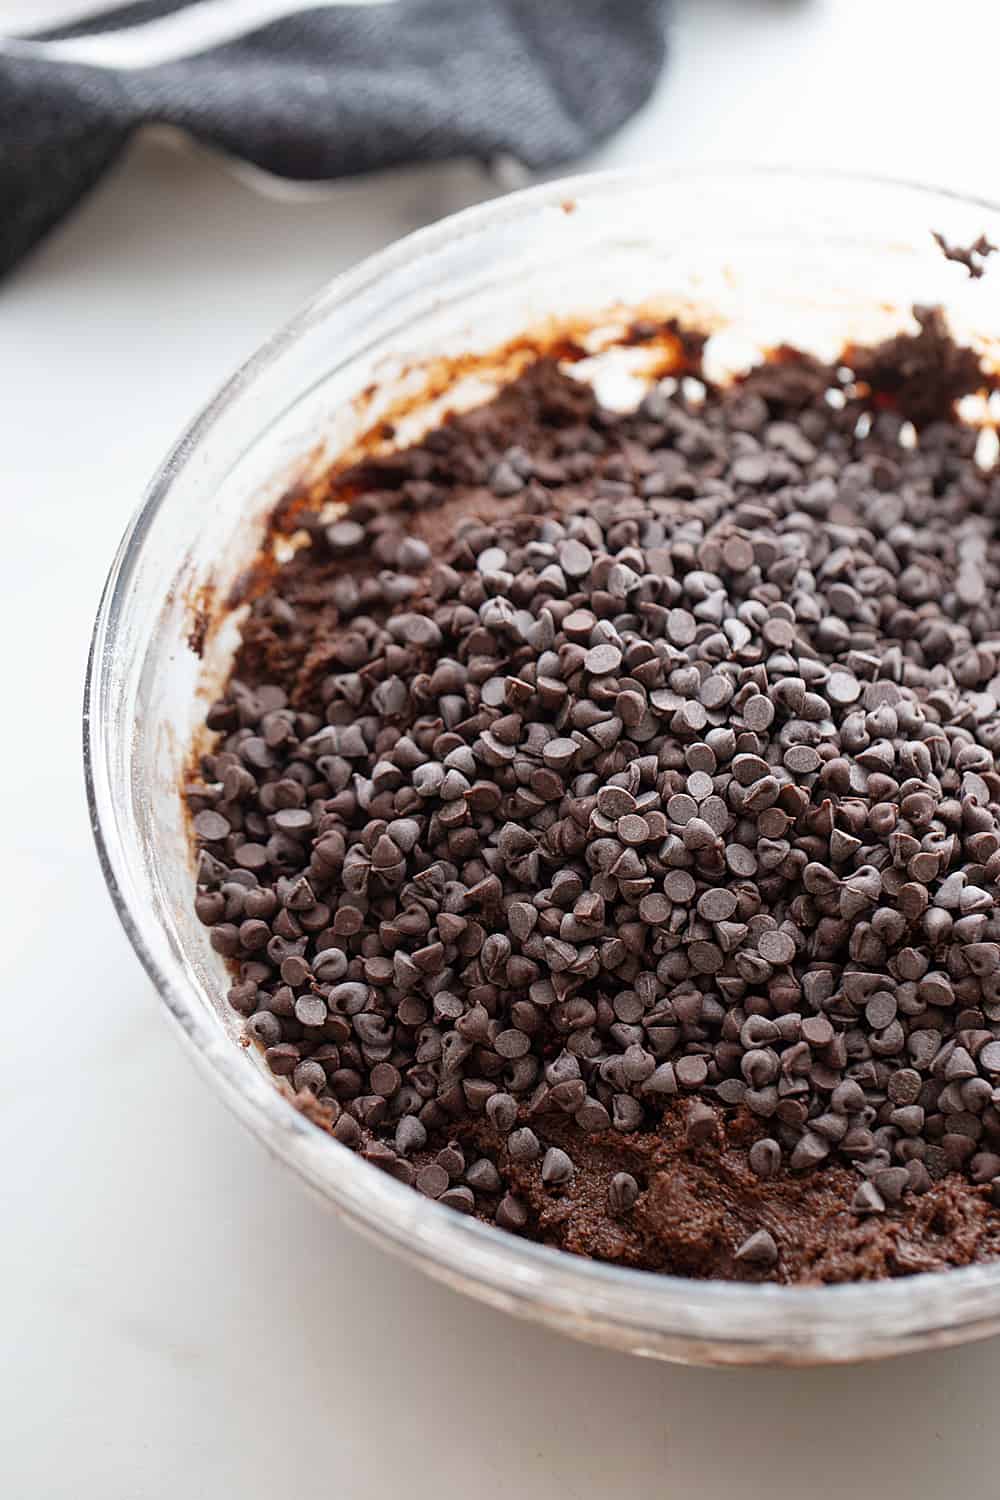 Adding chocolate chips to the Decadent Double Chocolate Crinkle Cookie batter